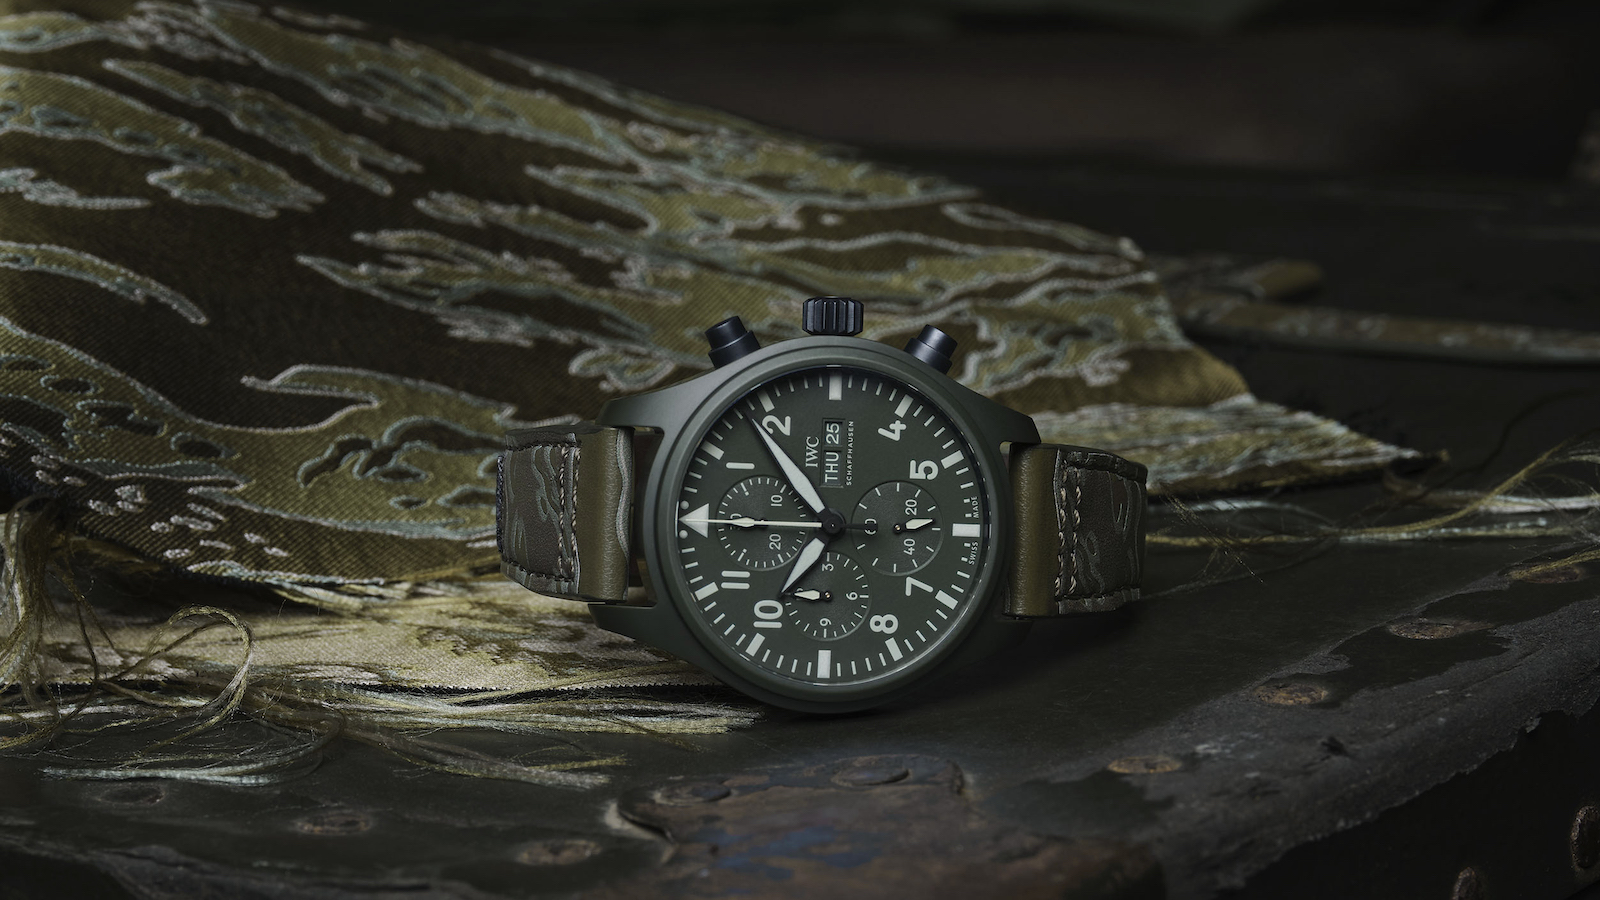 IWC Team Up With Iconic Streetwear Designer Mr. Sabotage On Limited-Edition Watch Strap